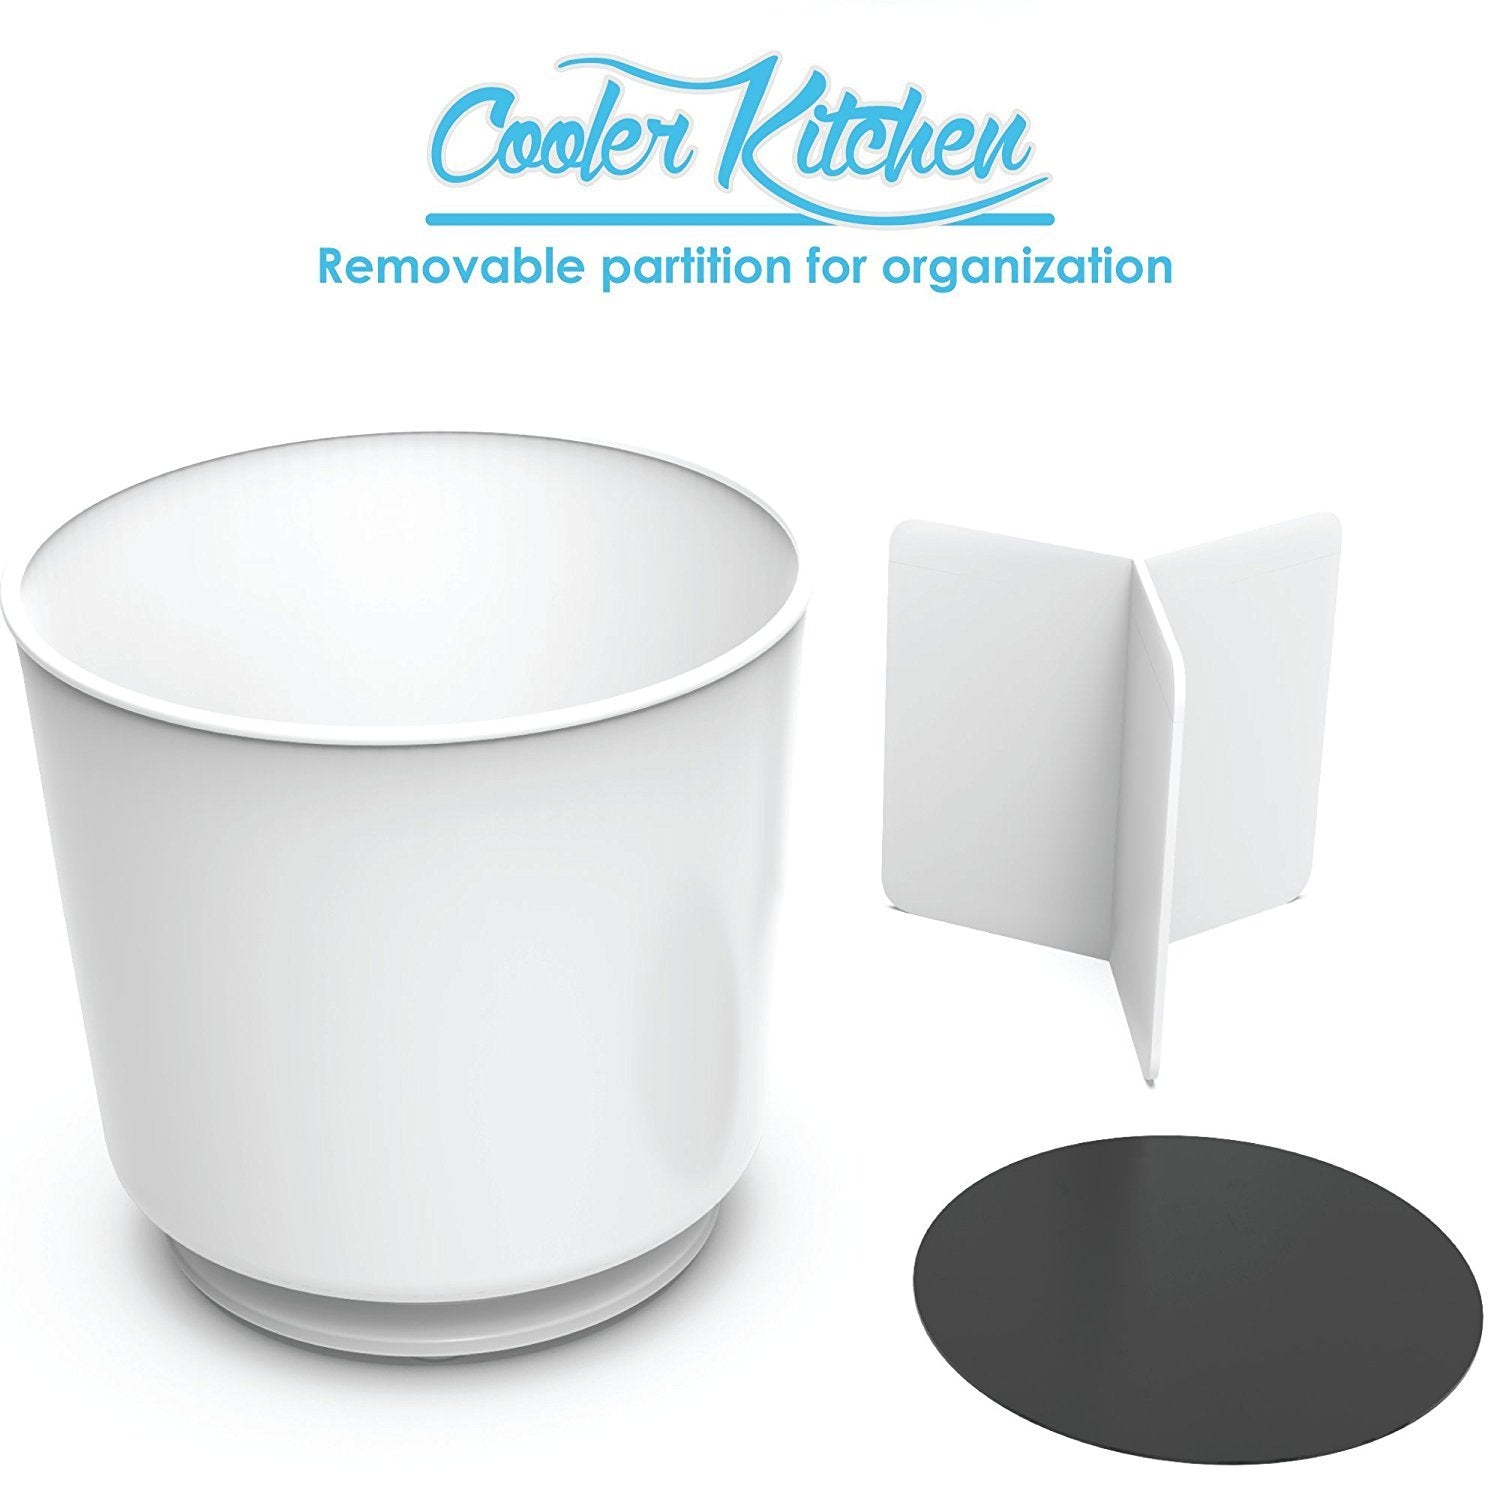 Extra Large and Sturdy Rotating Utensil Holder Caddy with No-Tip